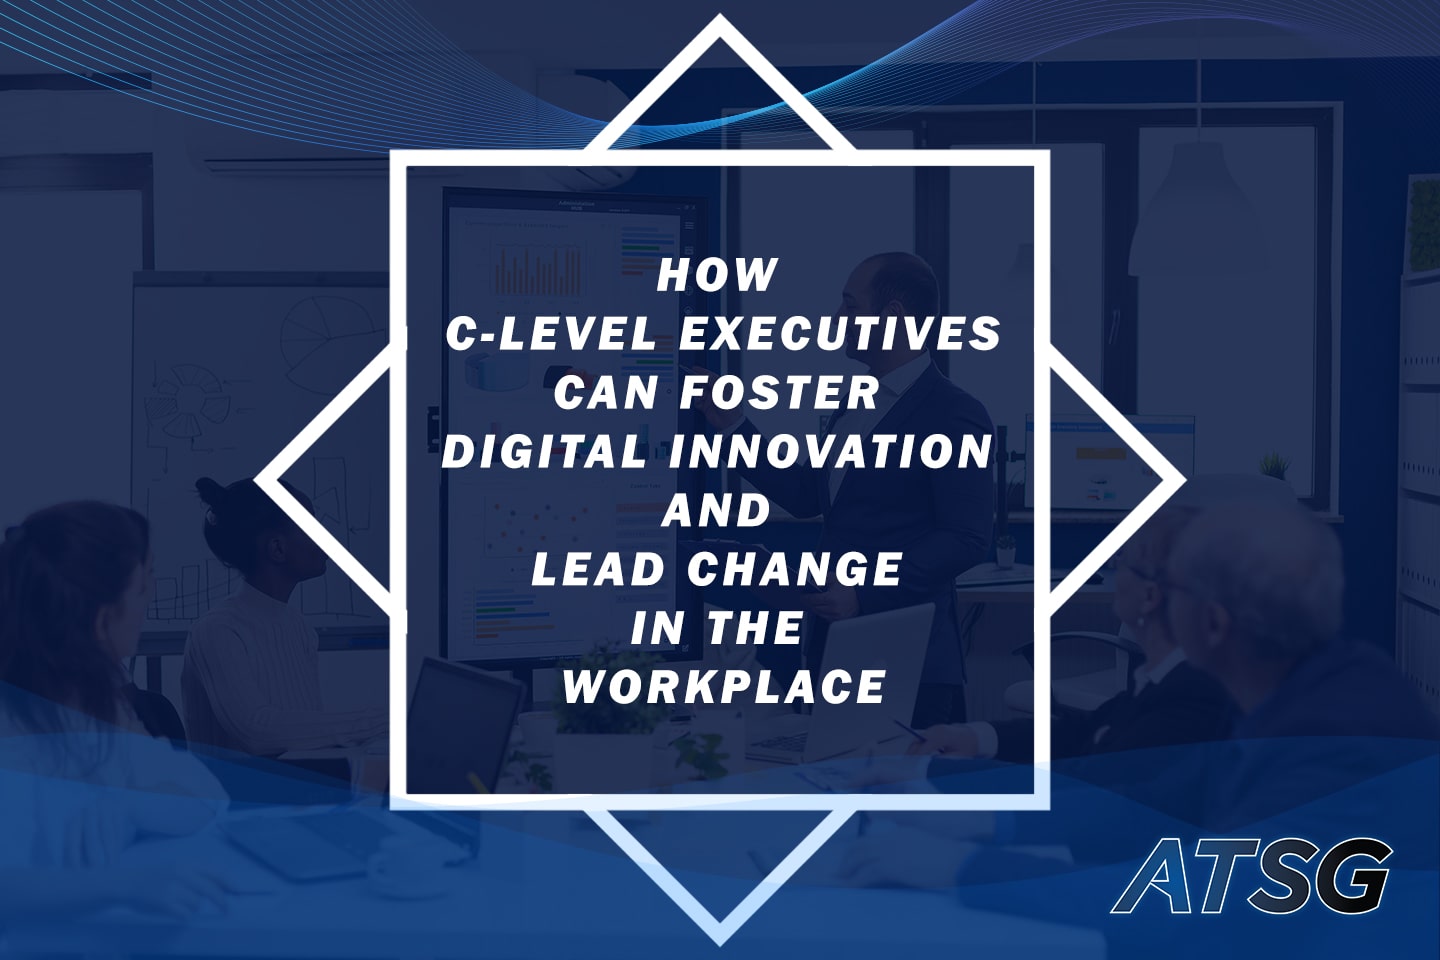 How-C-Level-Executives-Can-Foster-Digital-Innovation-and-Lead-Change-in-the-Workplace-Featured